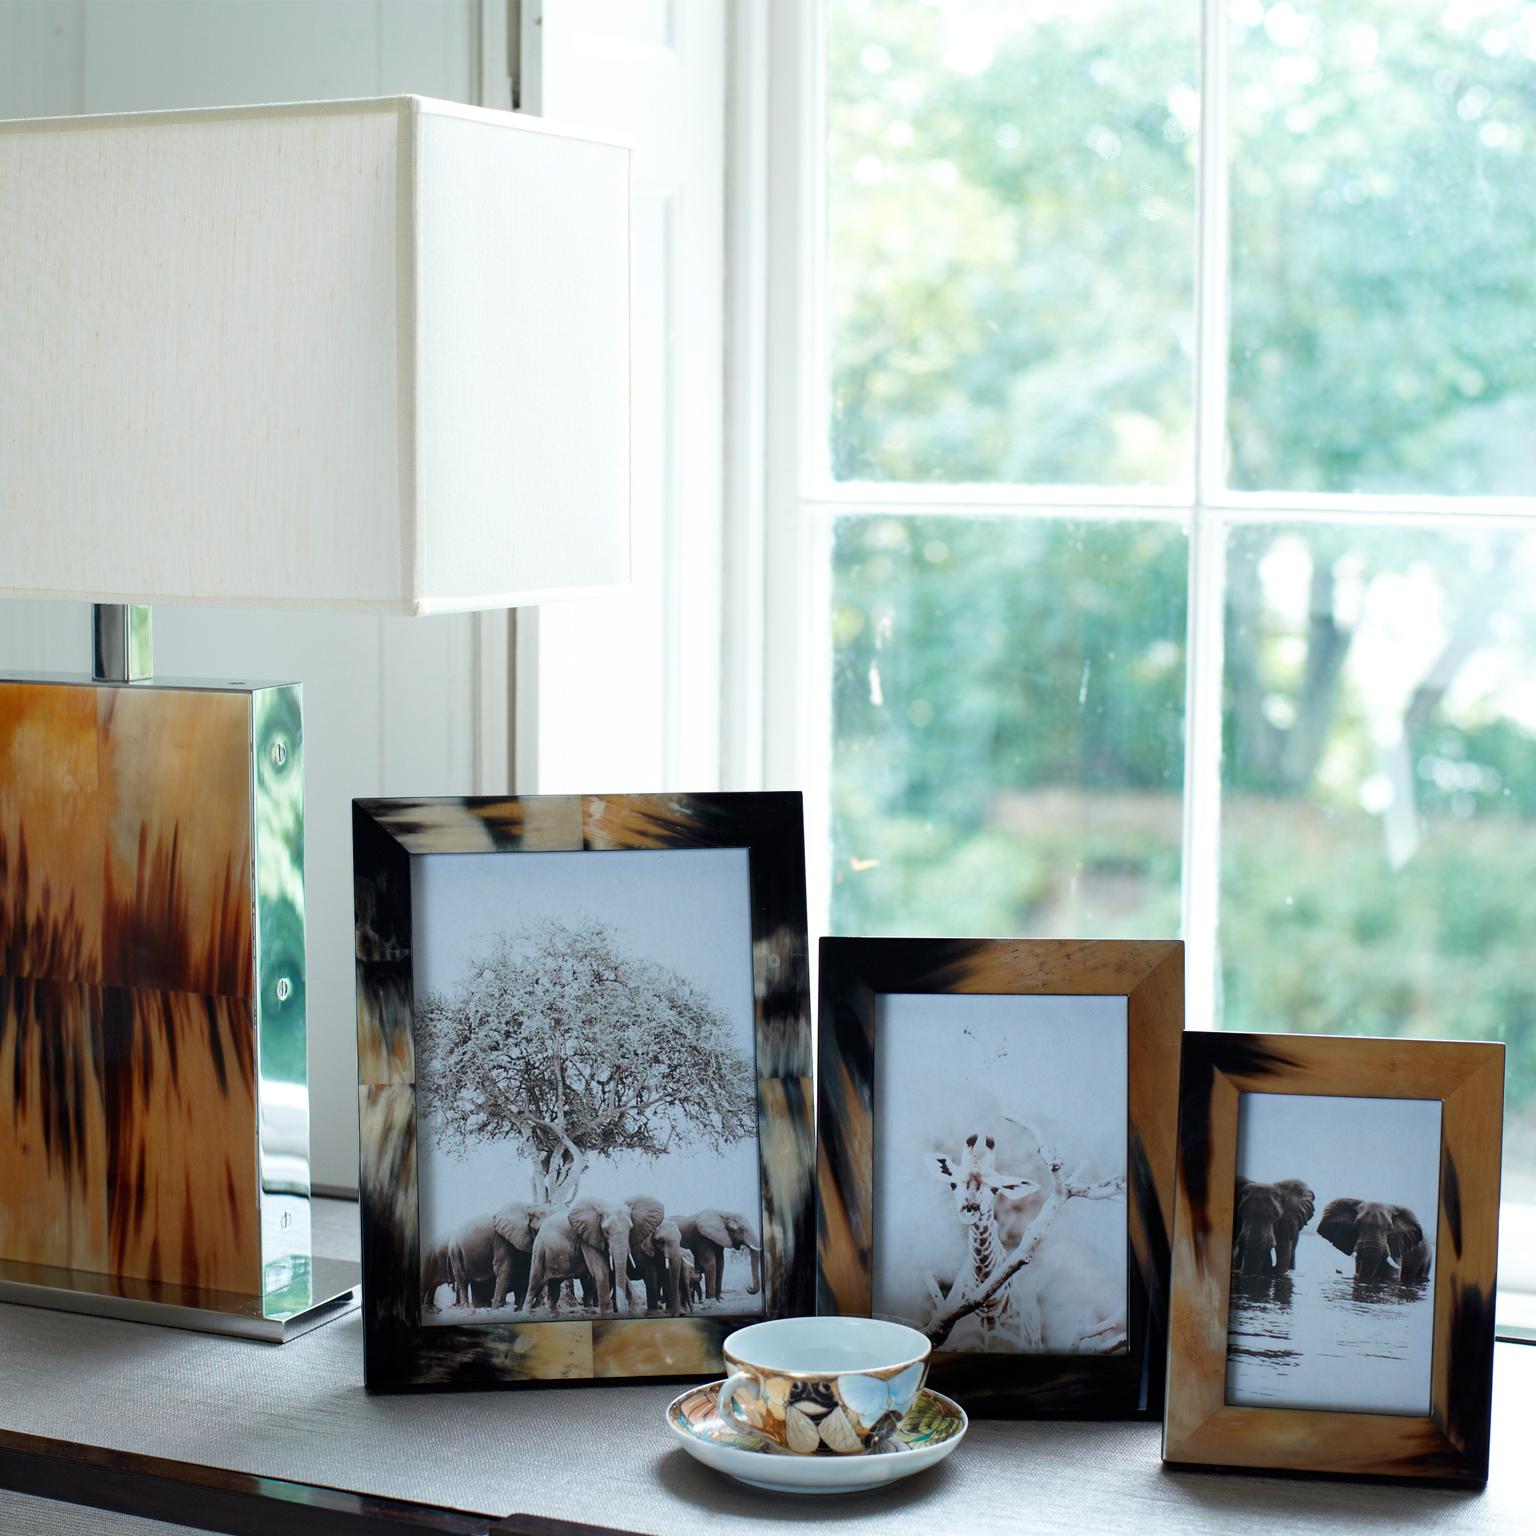 The most distinctive way to display your treasured photo memories, Dafne picture frame is crafted from natural Corno Italiano and sports desirable white, cream, and brown nuances. Corno Italiano grains work harmoniously with the frame back and